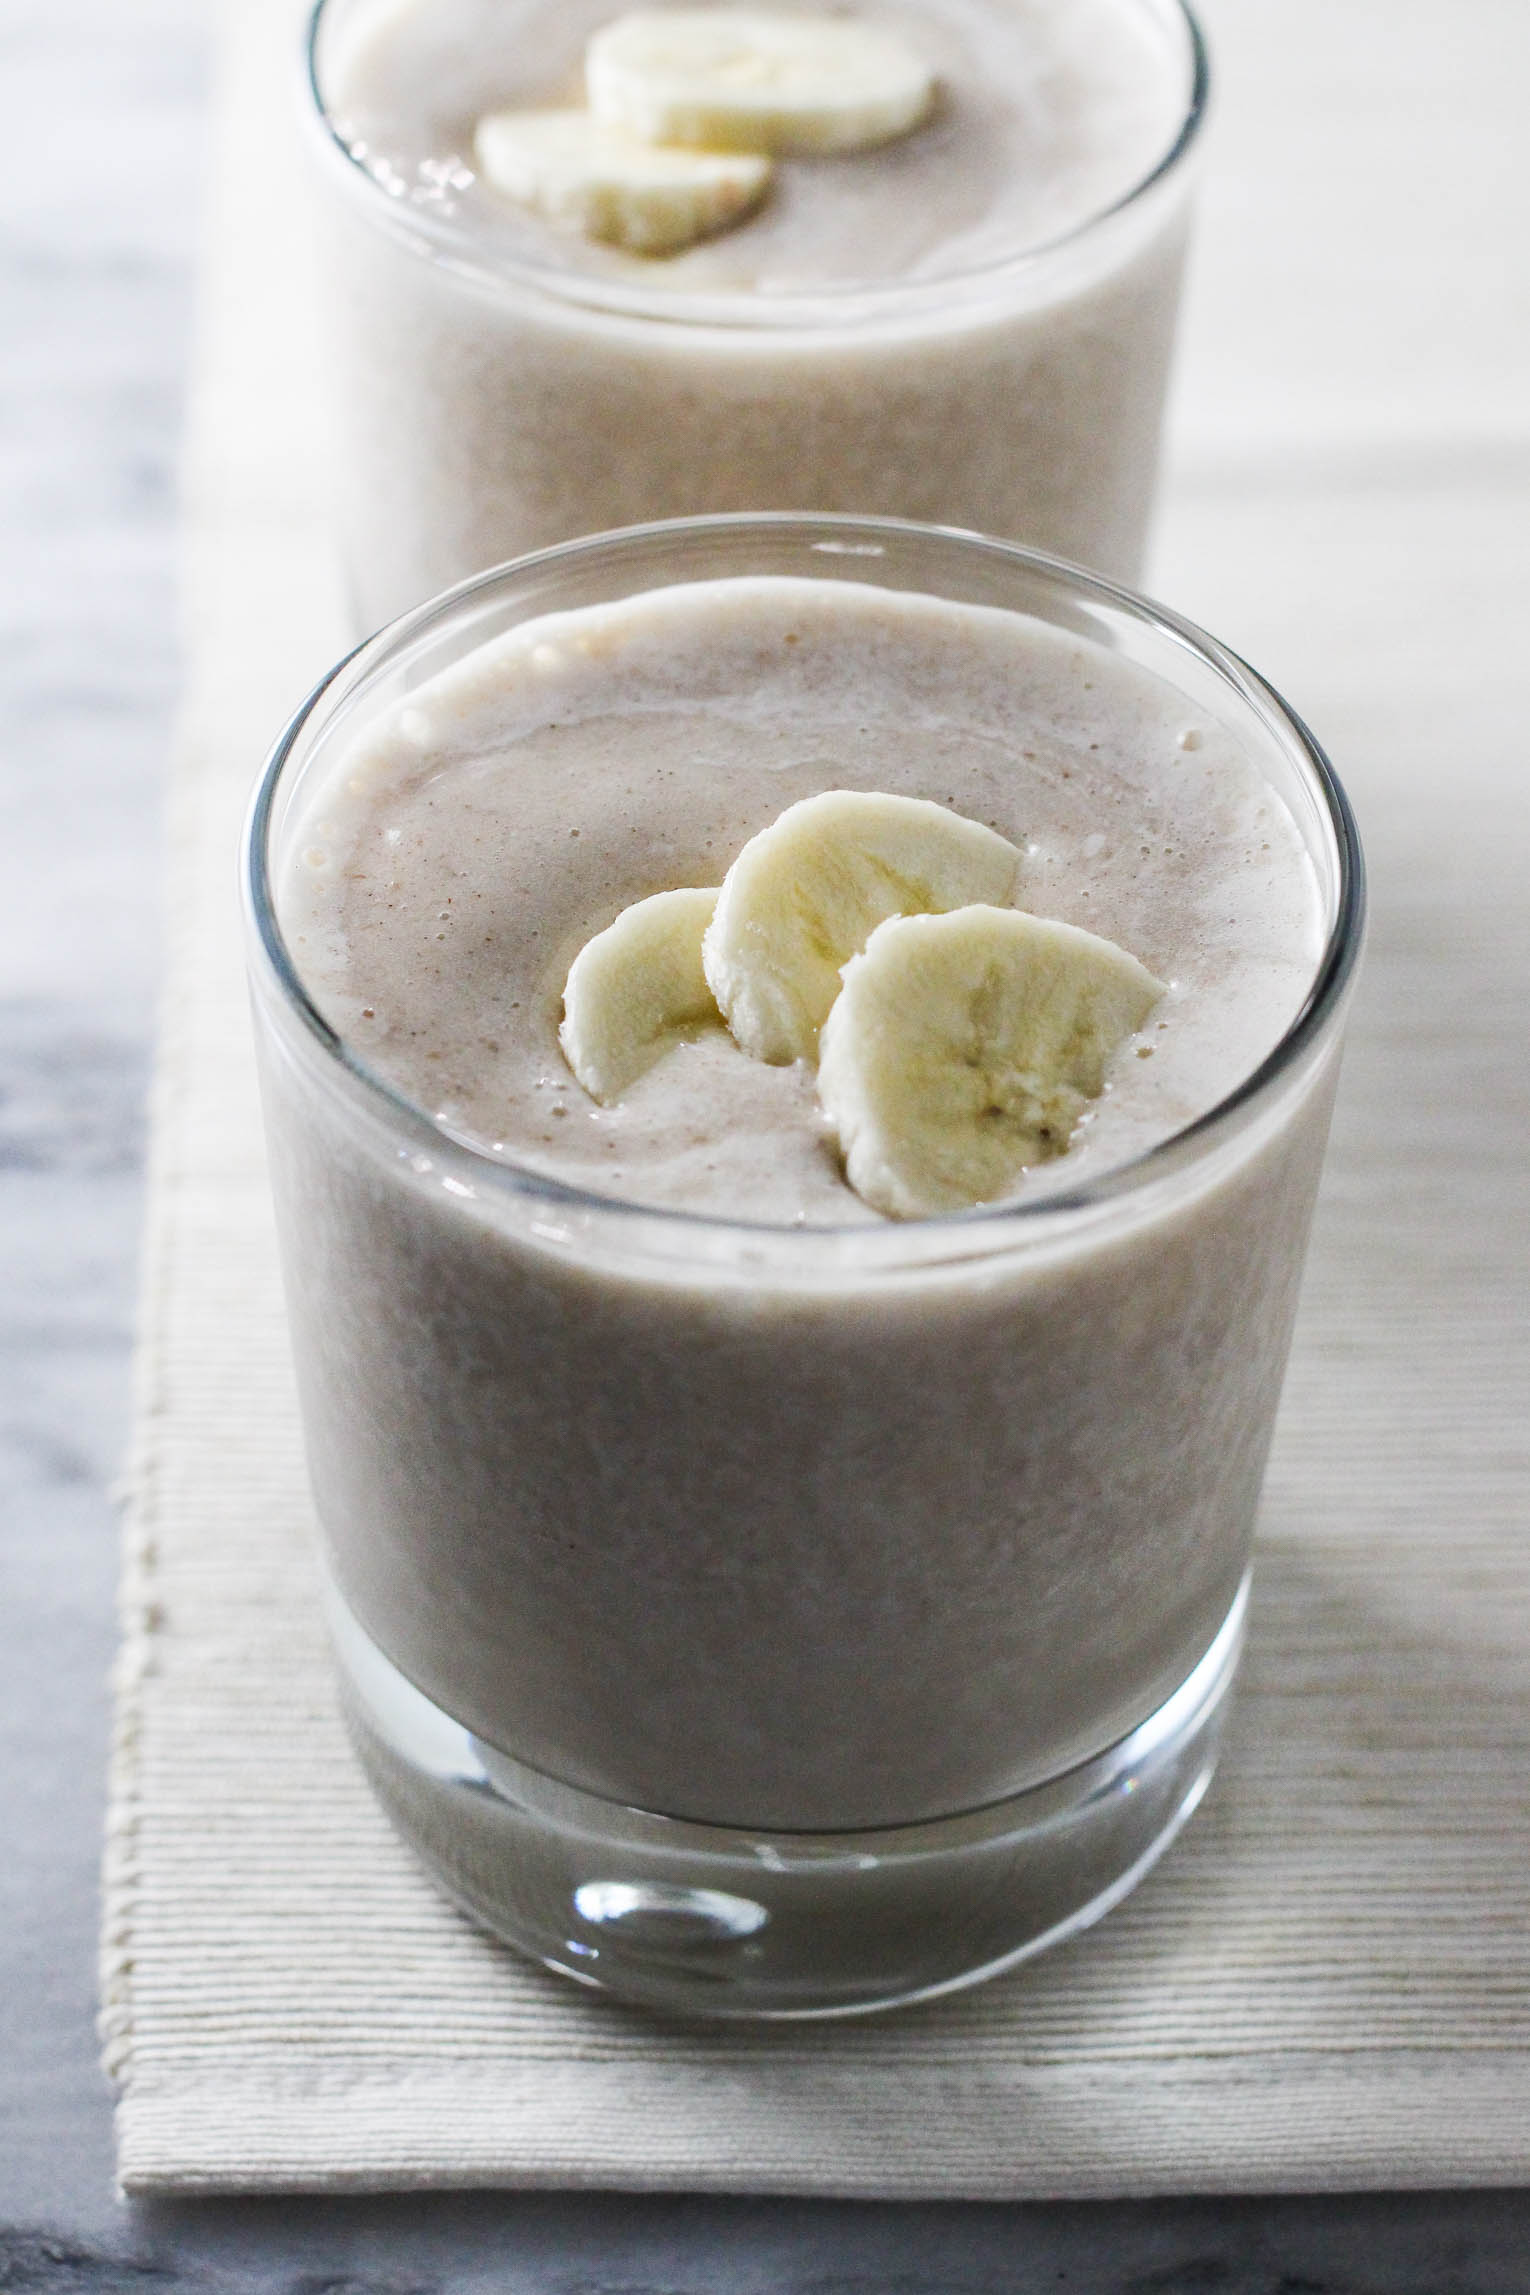 A glass of banana smoothie garnished with three banana slices. Another glass in the background.